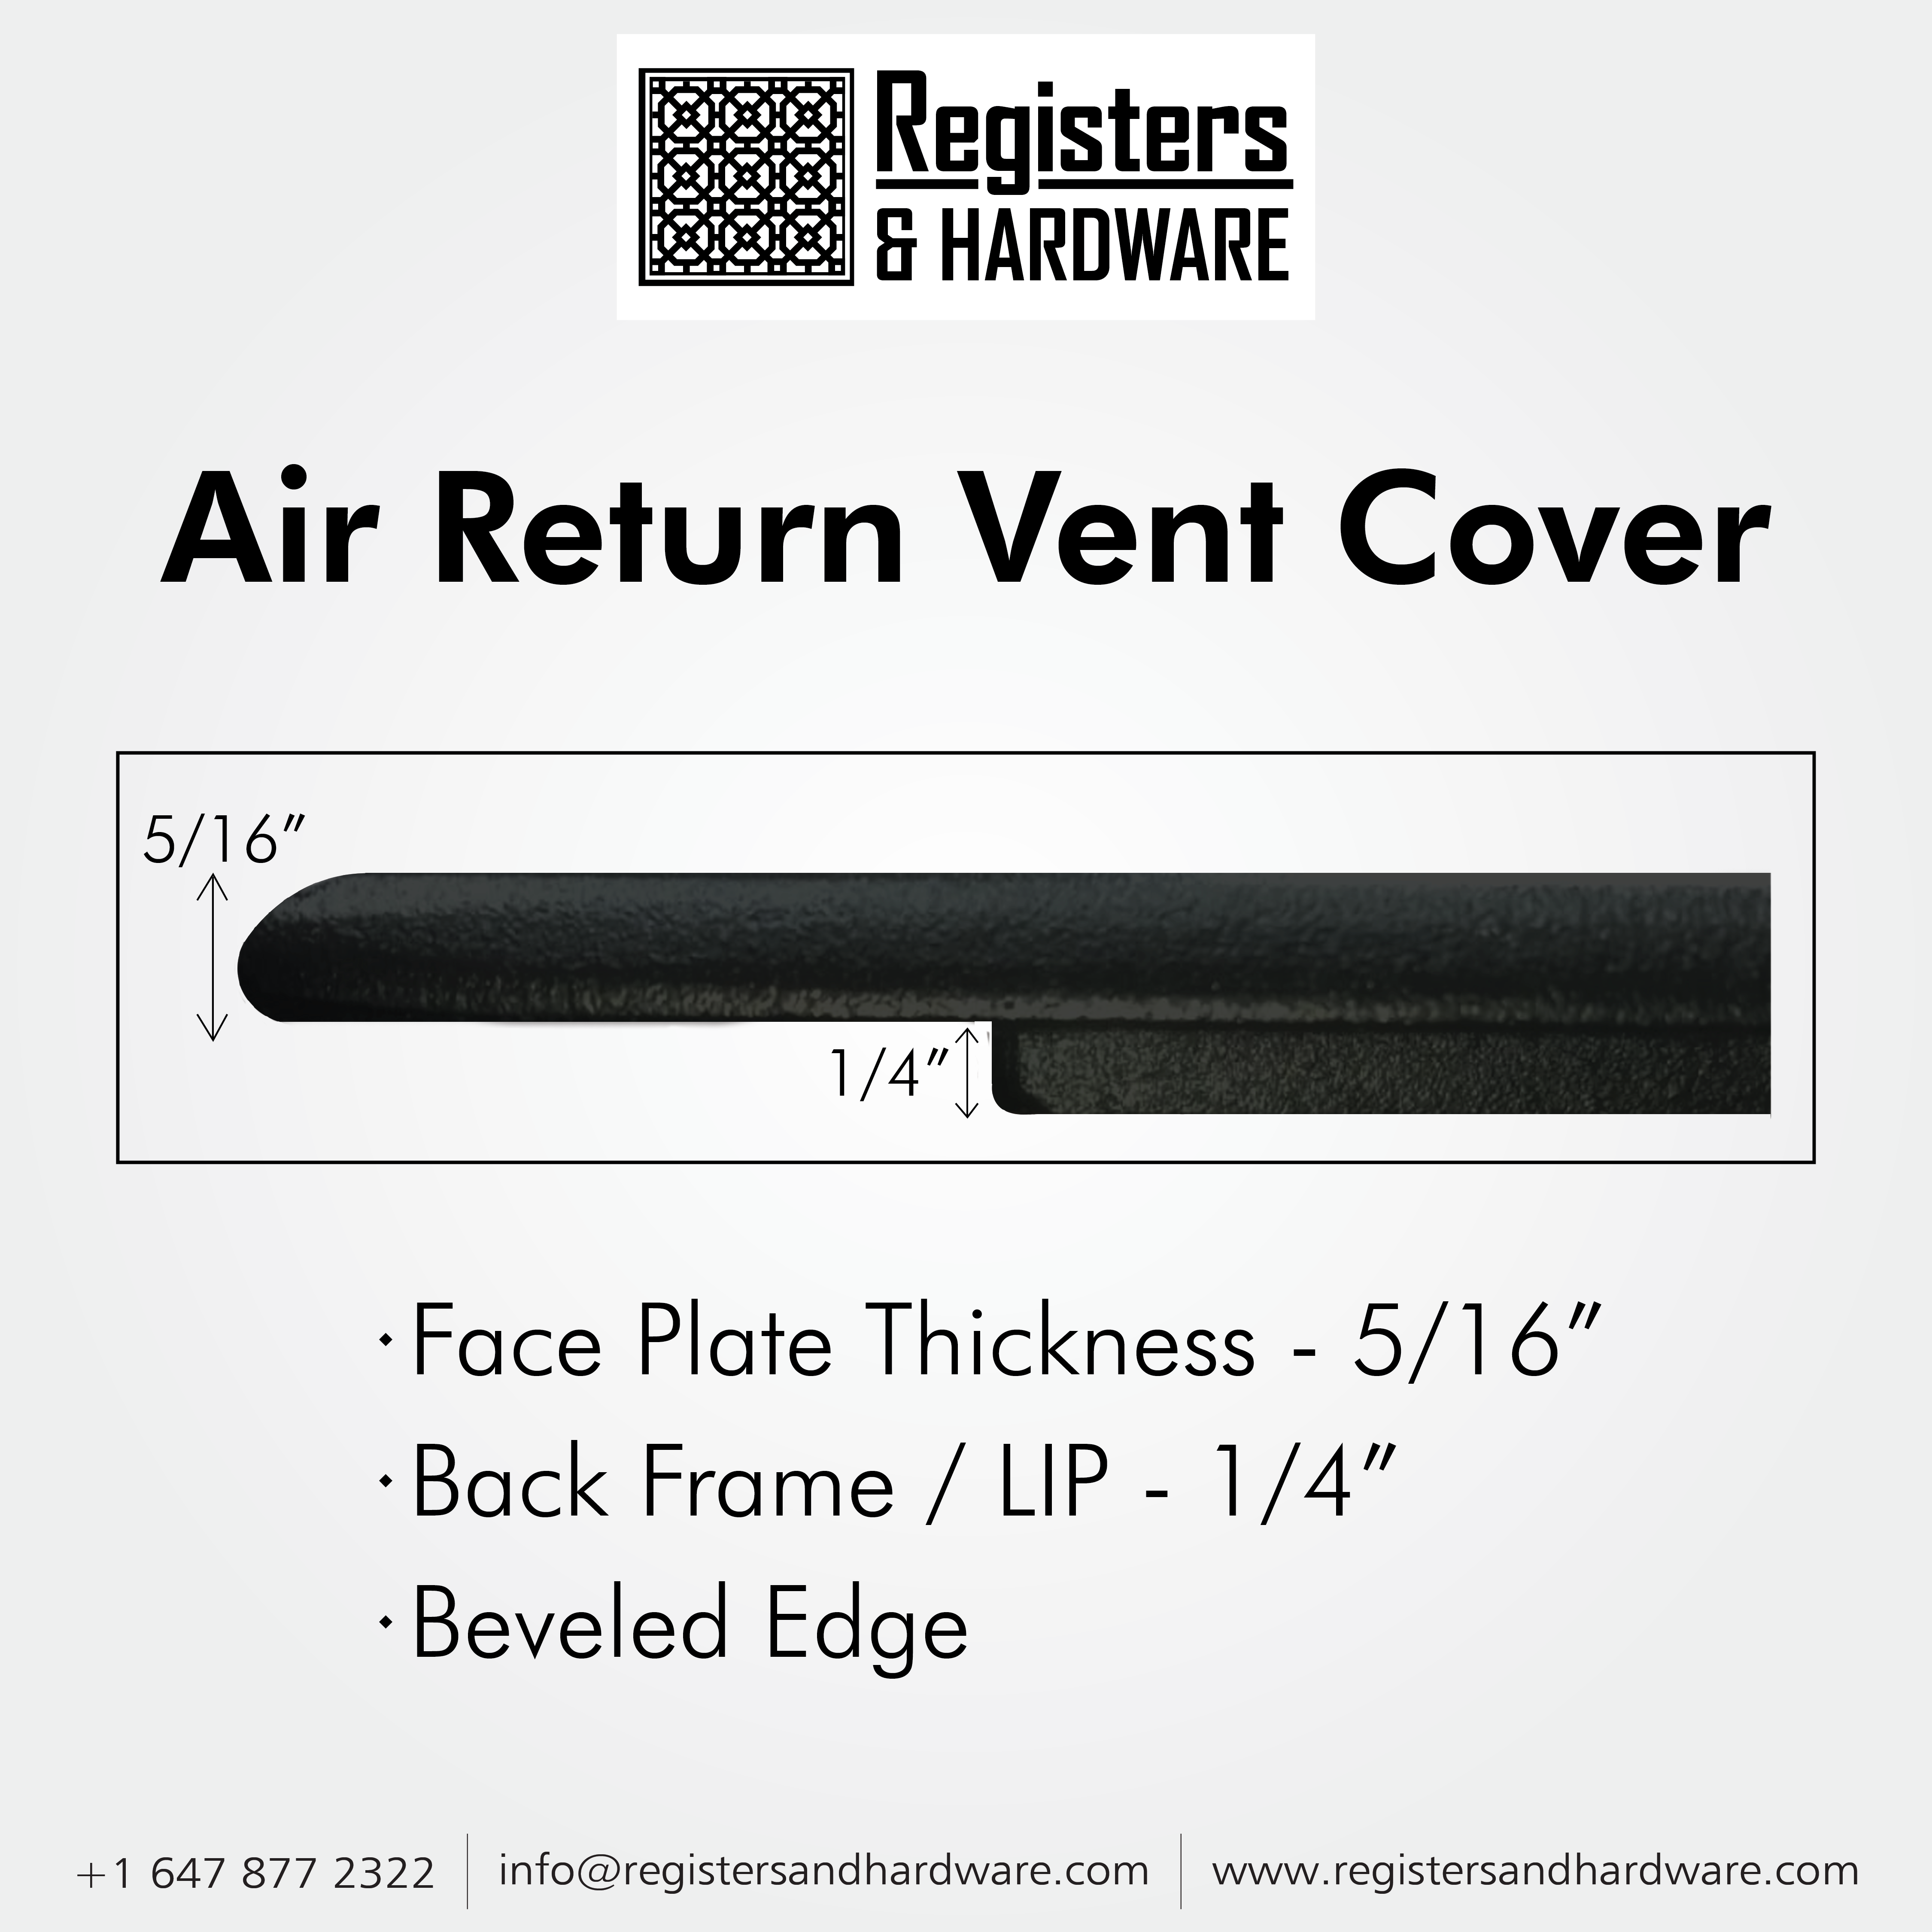 Achtek AIR RETURN 8"x26" Duct Opening (Overall Size 10"x28") | Heavy Cast Aluminum Air Grille HVAC Duct || Powder Coated